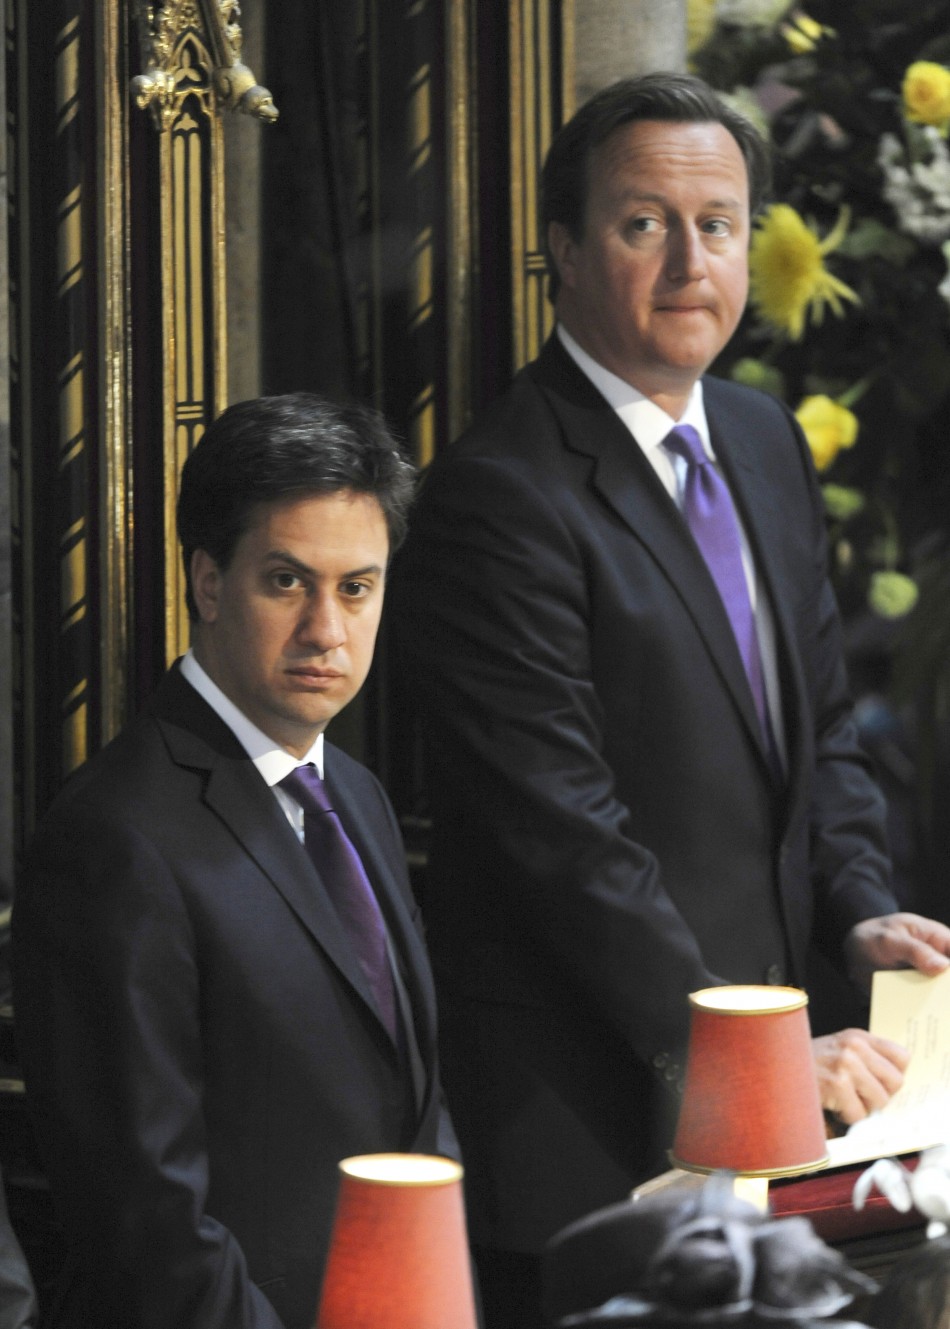 Prime Minister David Cameron R and opposition Labour Party leader Ed Miliband attend a service celebrating the 60th anniversary of Queen Elizabeths coronation at Westminster Abbey in London June 4, 2013.